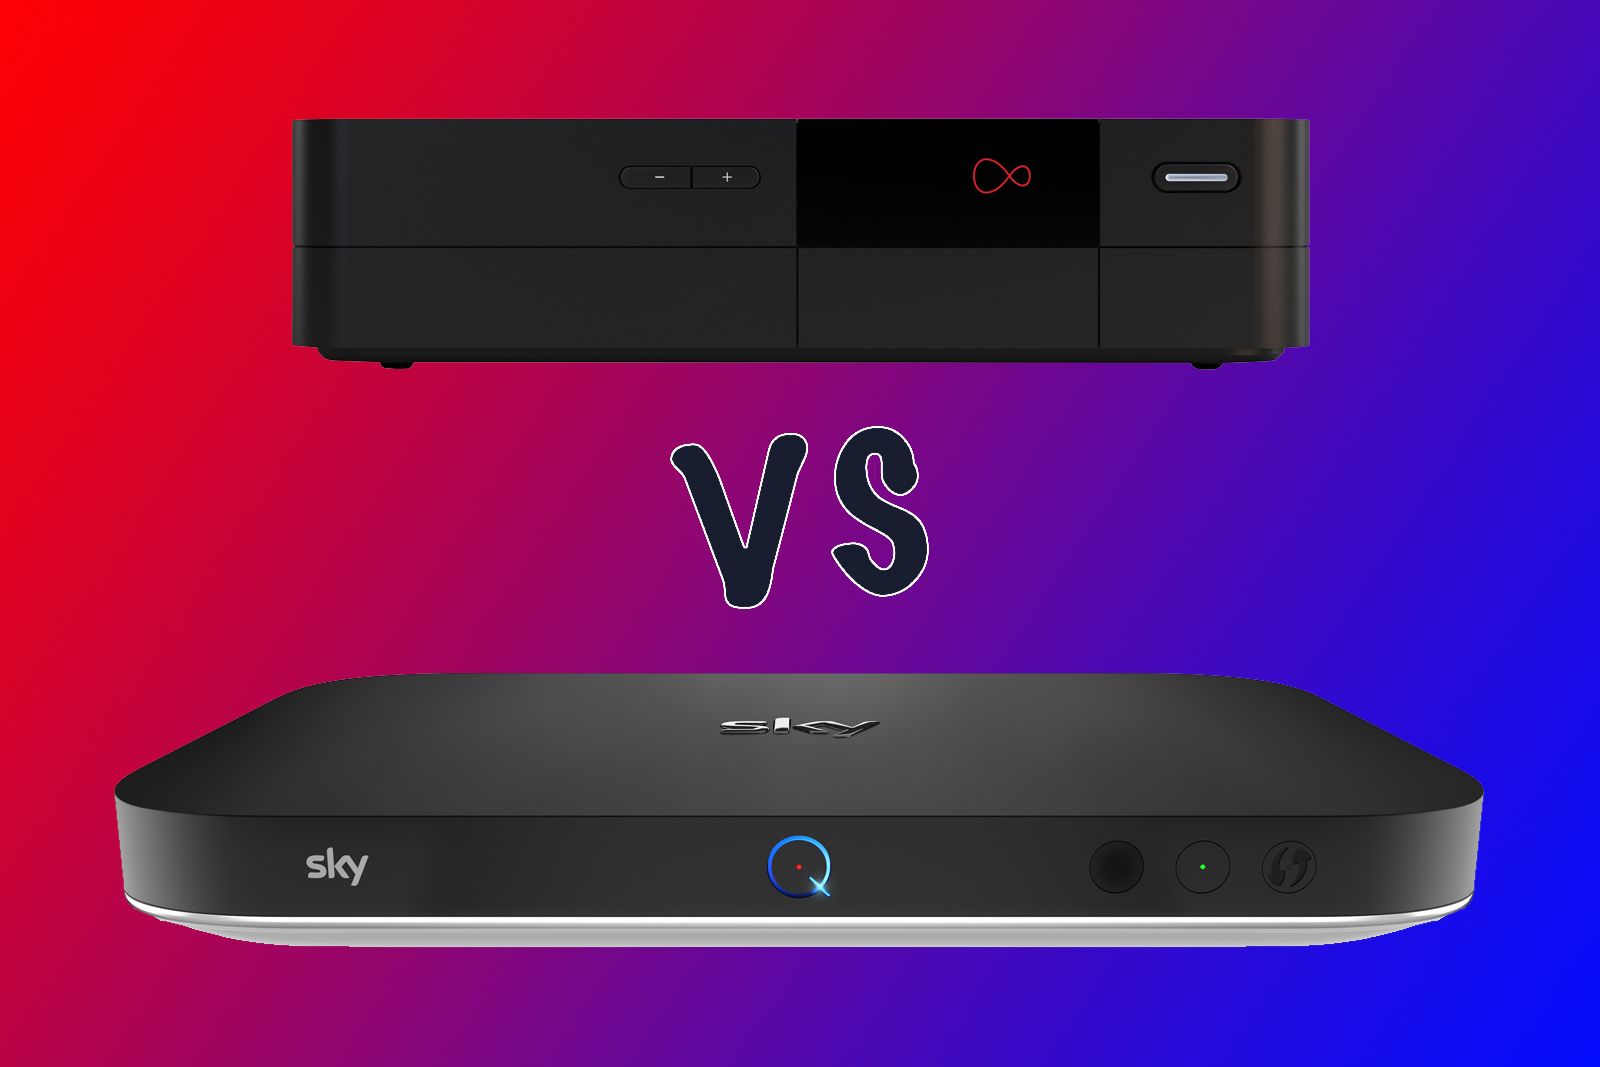 virgin tv v6 box vs sky q what s the difference  image 1